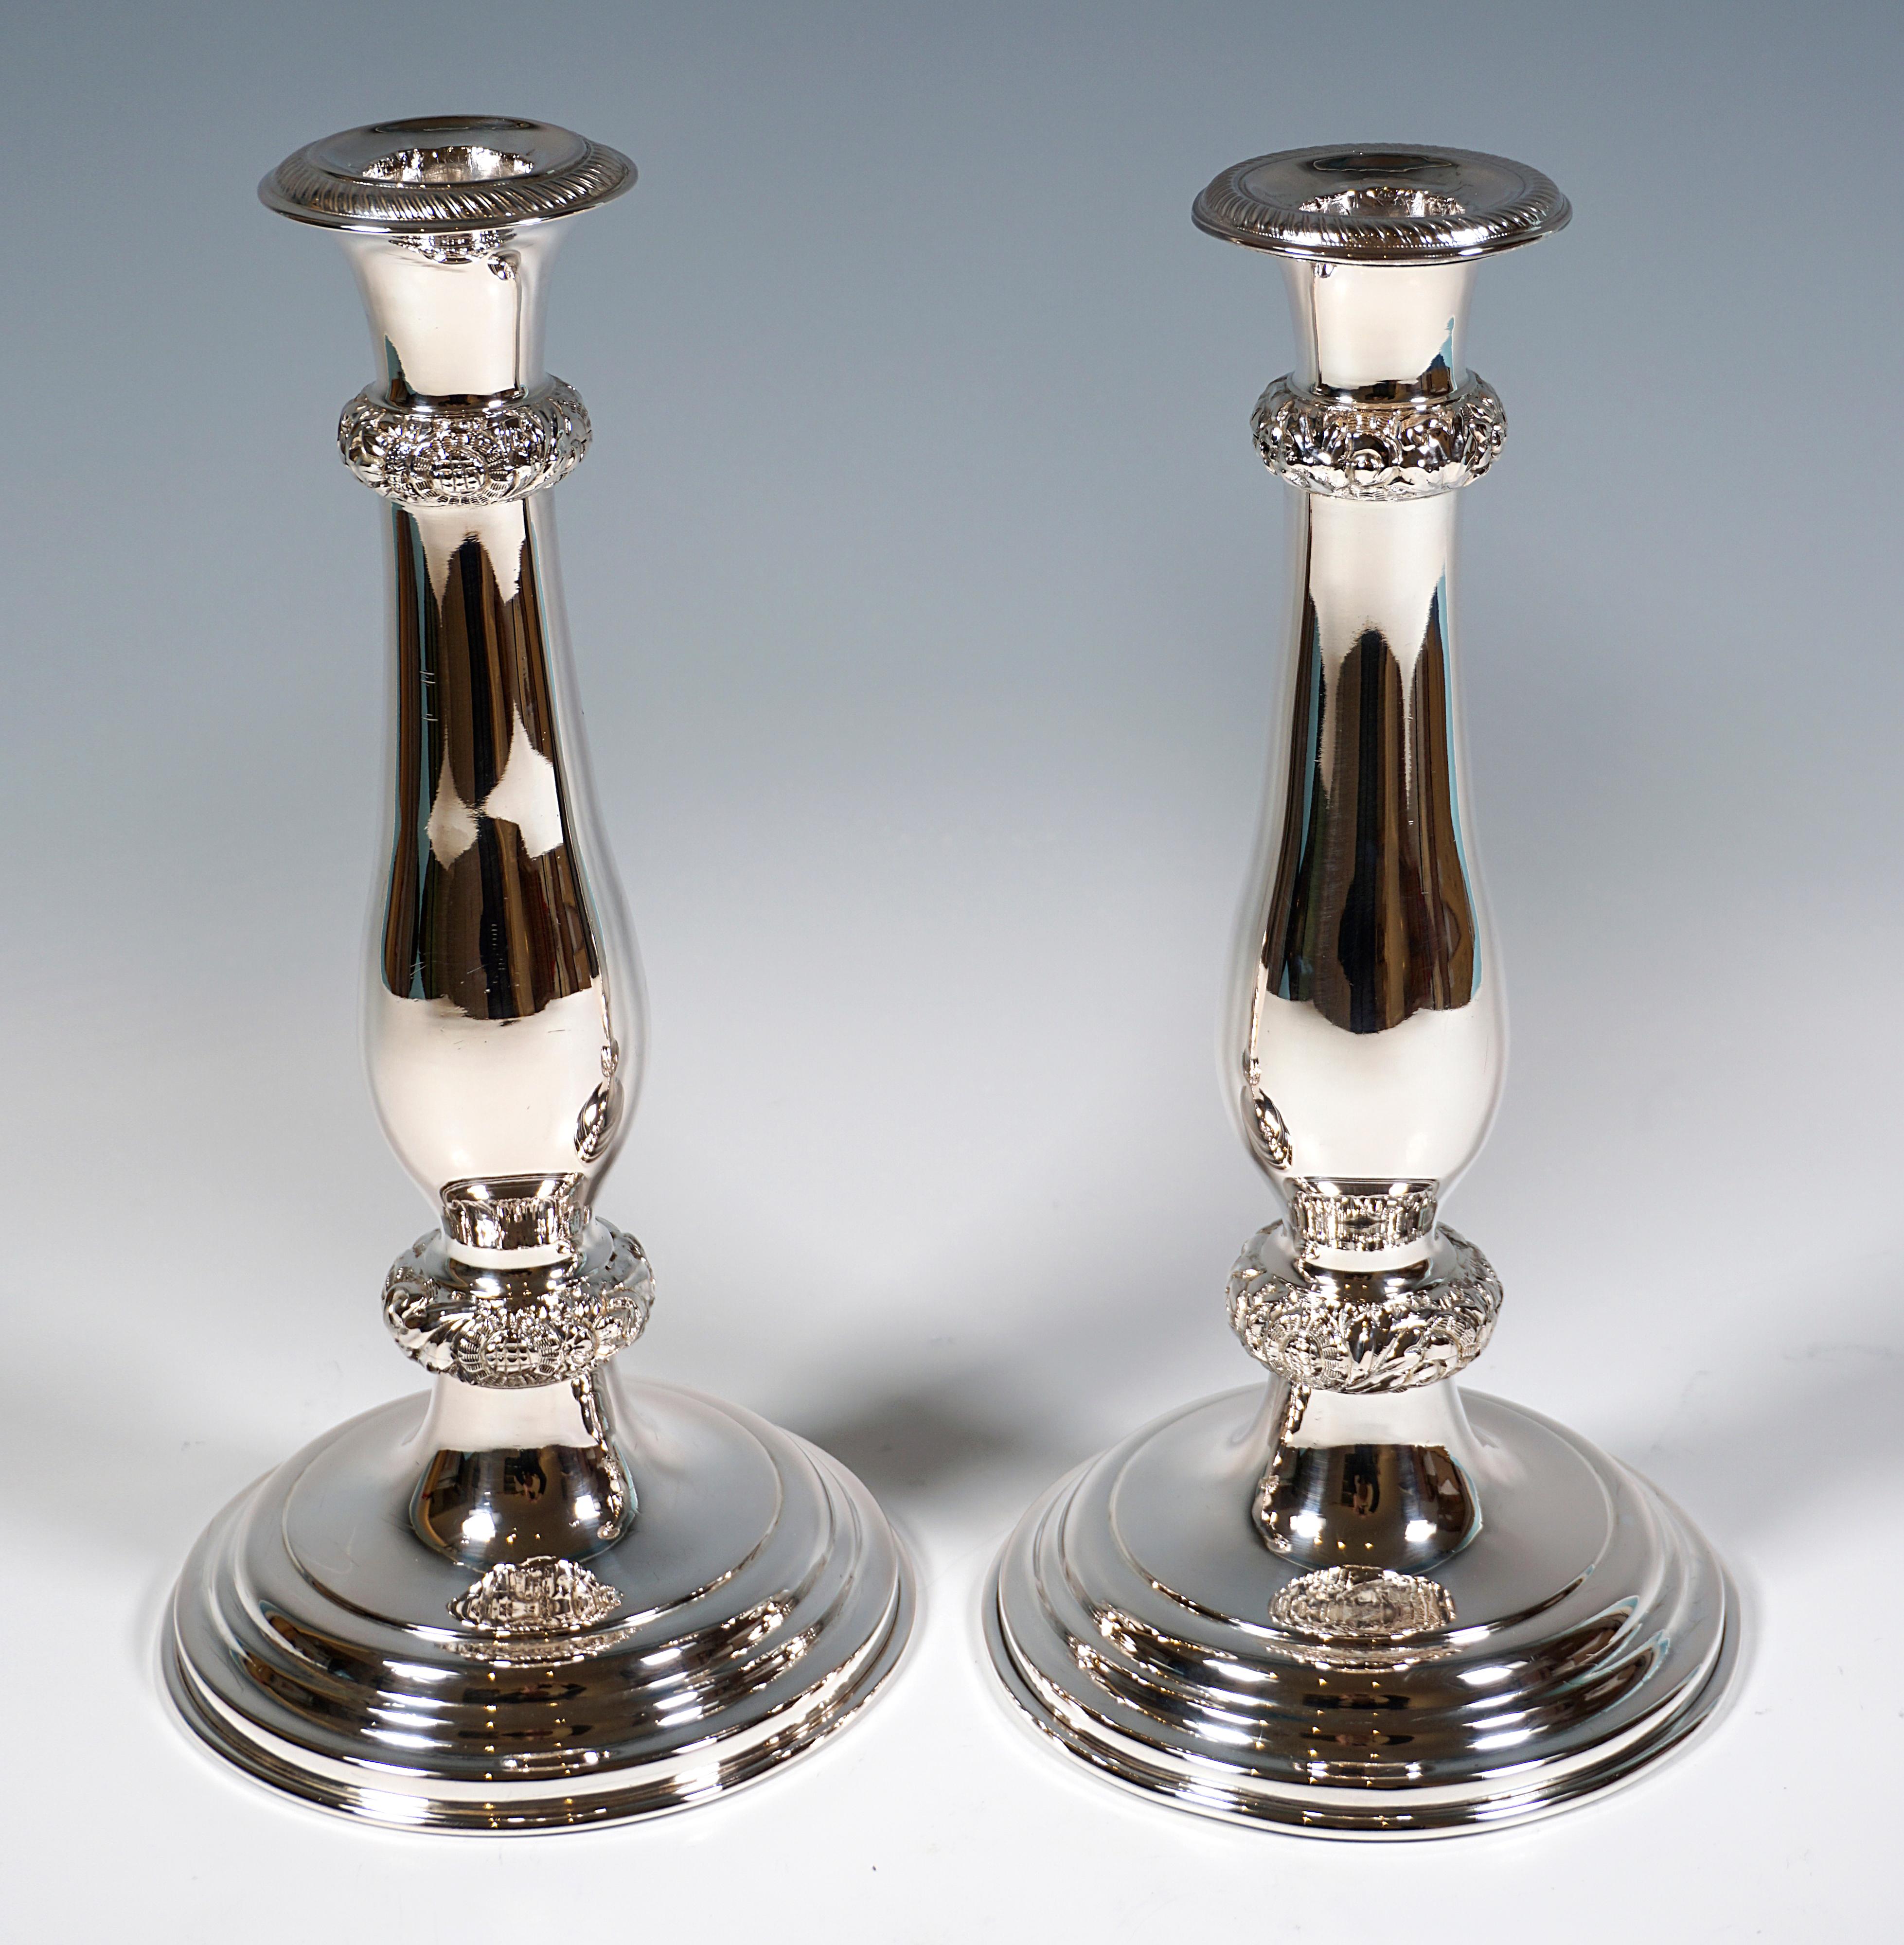 Two festive Biedermeier silver candlesticks on a round, stepped domed stand with a smooth, baluster-shaped shaft, beaded rings decorated with flowers and rocaille in relief, vase-shaped spouts with corded ribbon relief on the top.

Branded by the